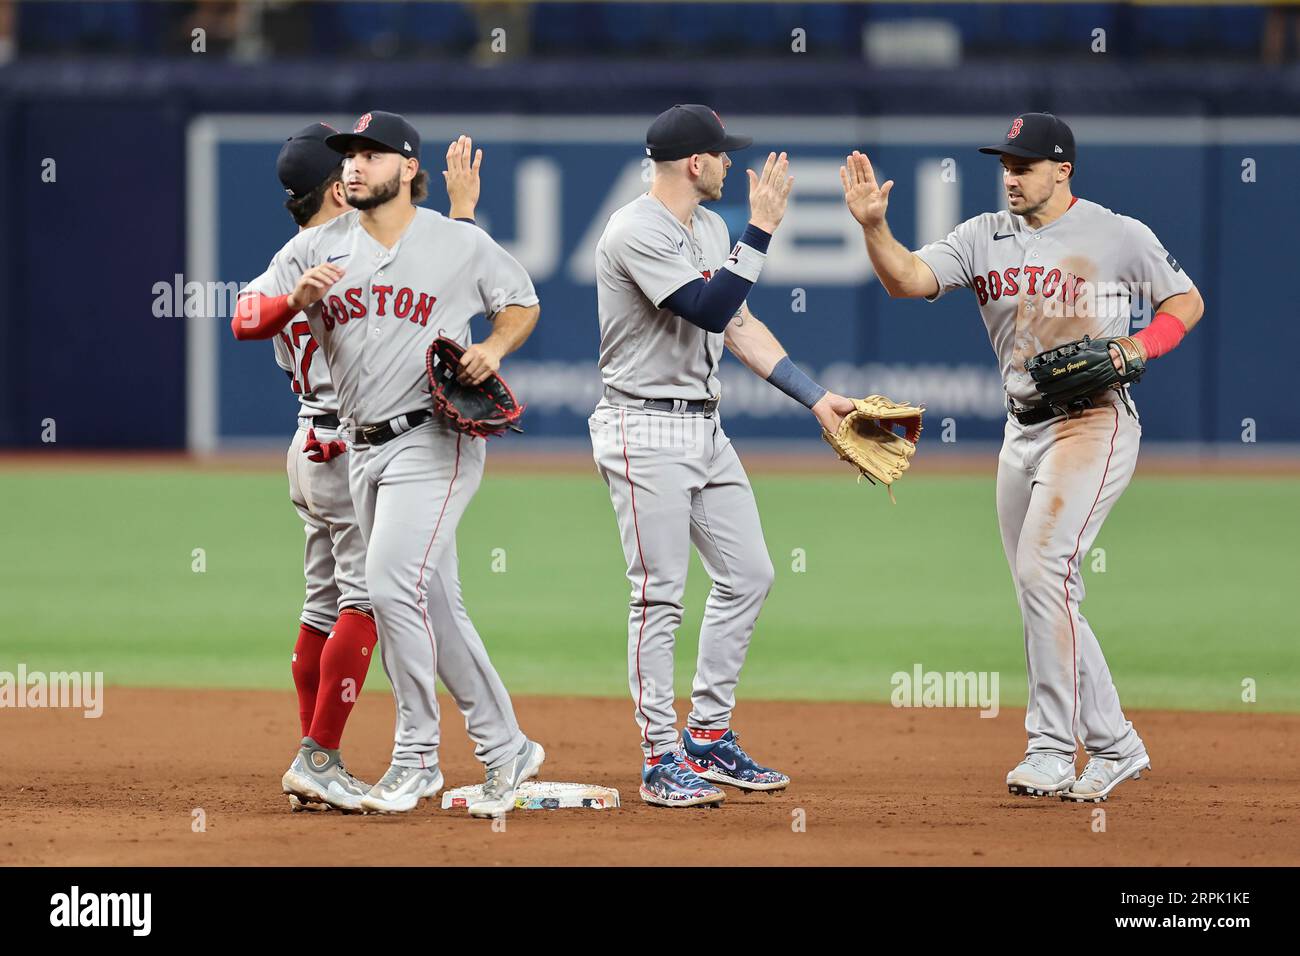 St. Petersburg, FL USA; Handshakes for the winners as Boston Red Sox players give high fives as they head to the dugout after an MLB game against the Stock Photo